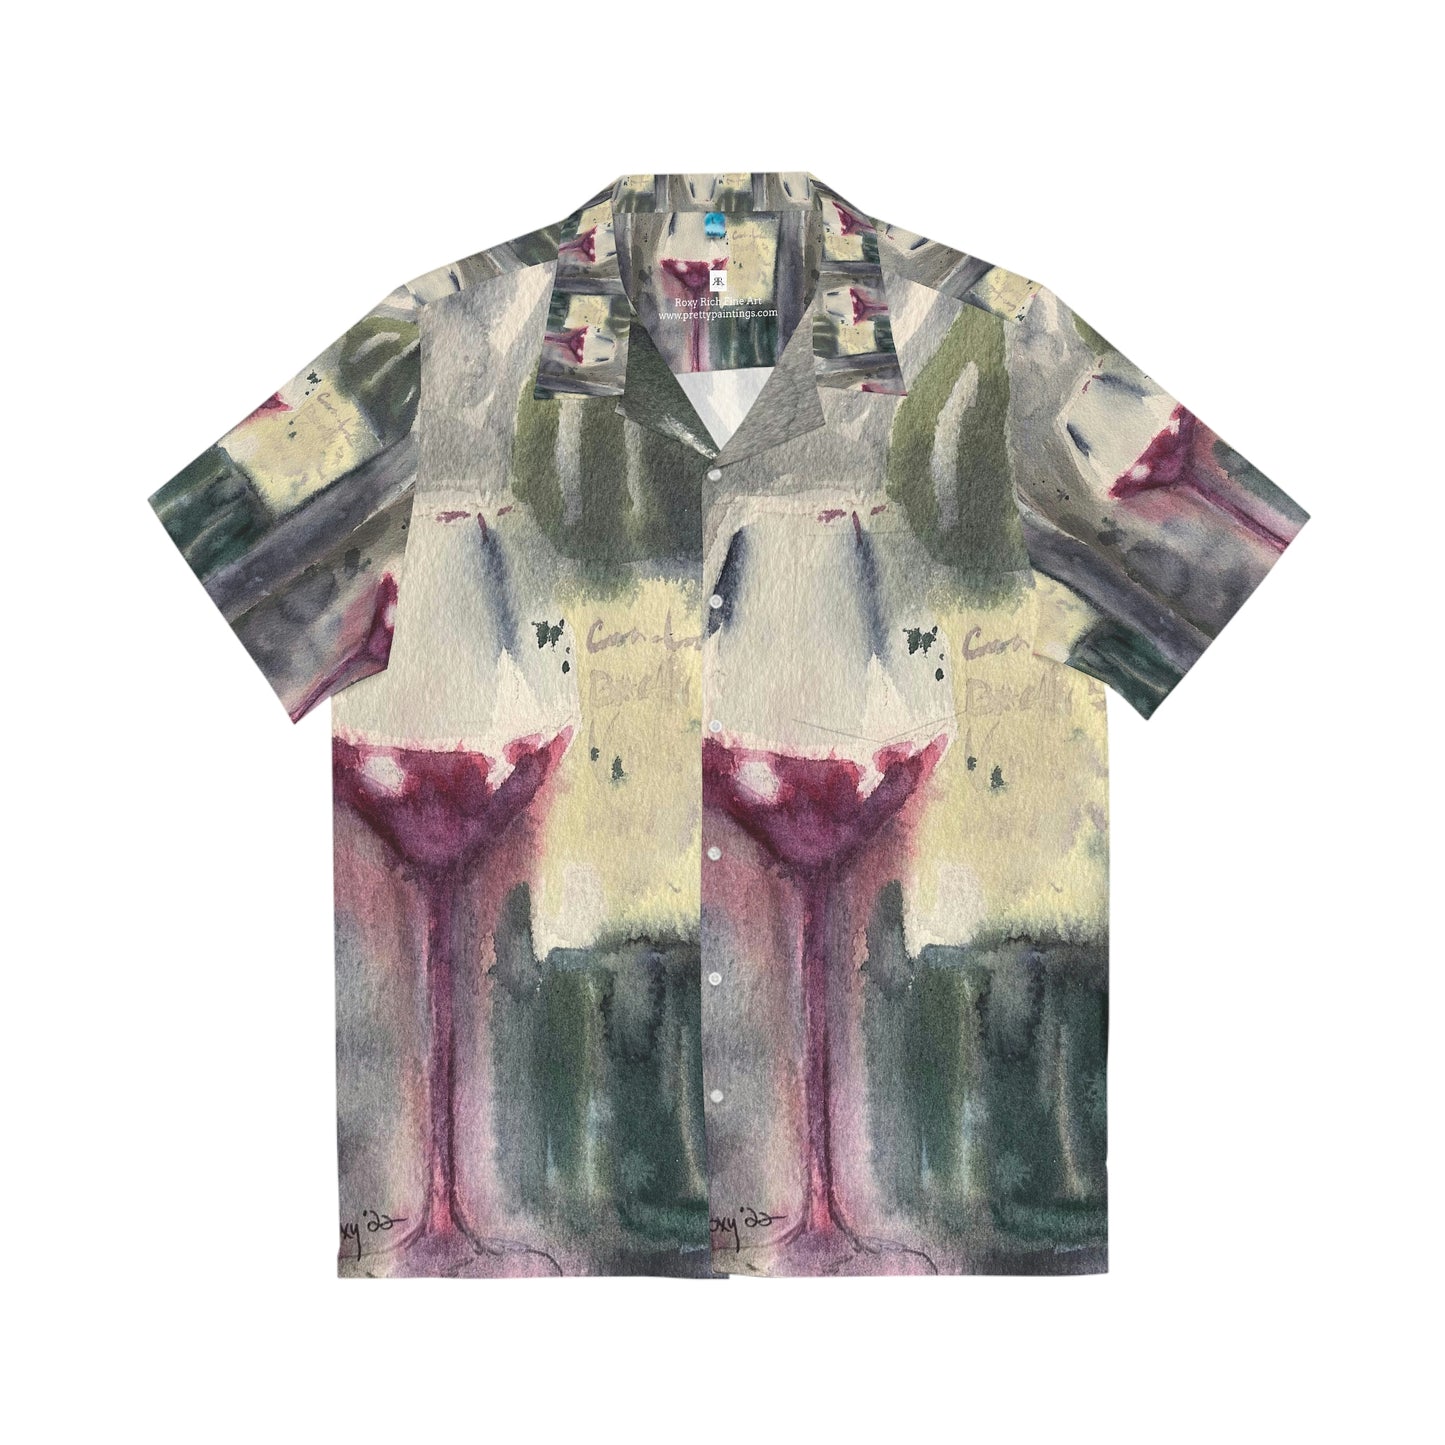 Wine Lover Original Loose Watercolor GBV Bottle and Glass Painting Men's Hawaiian Shirt